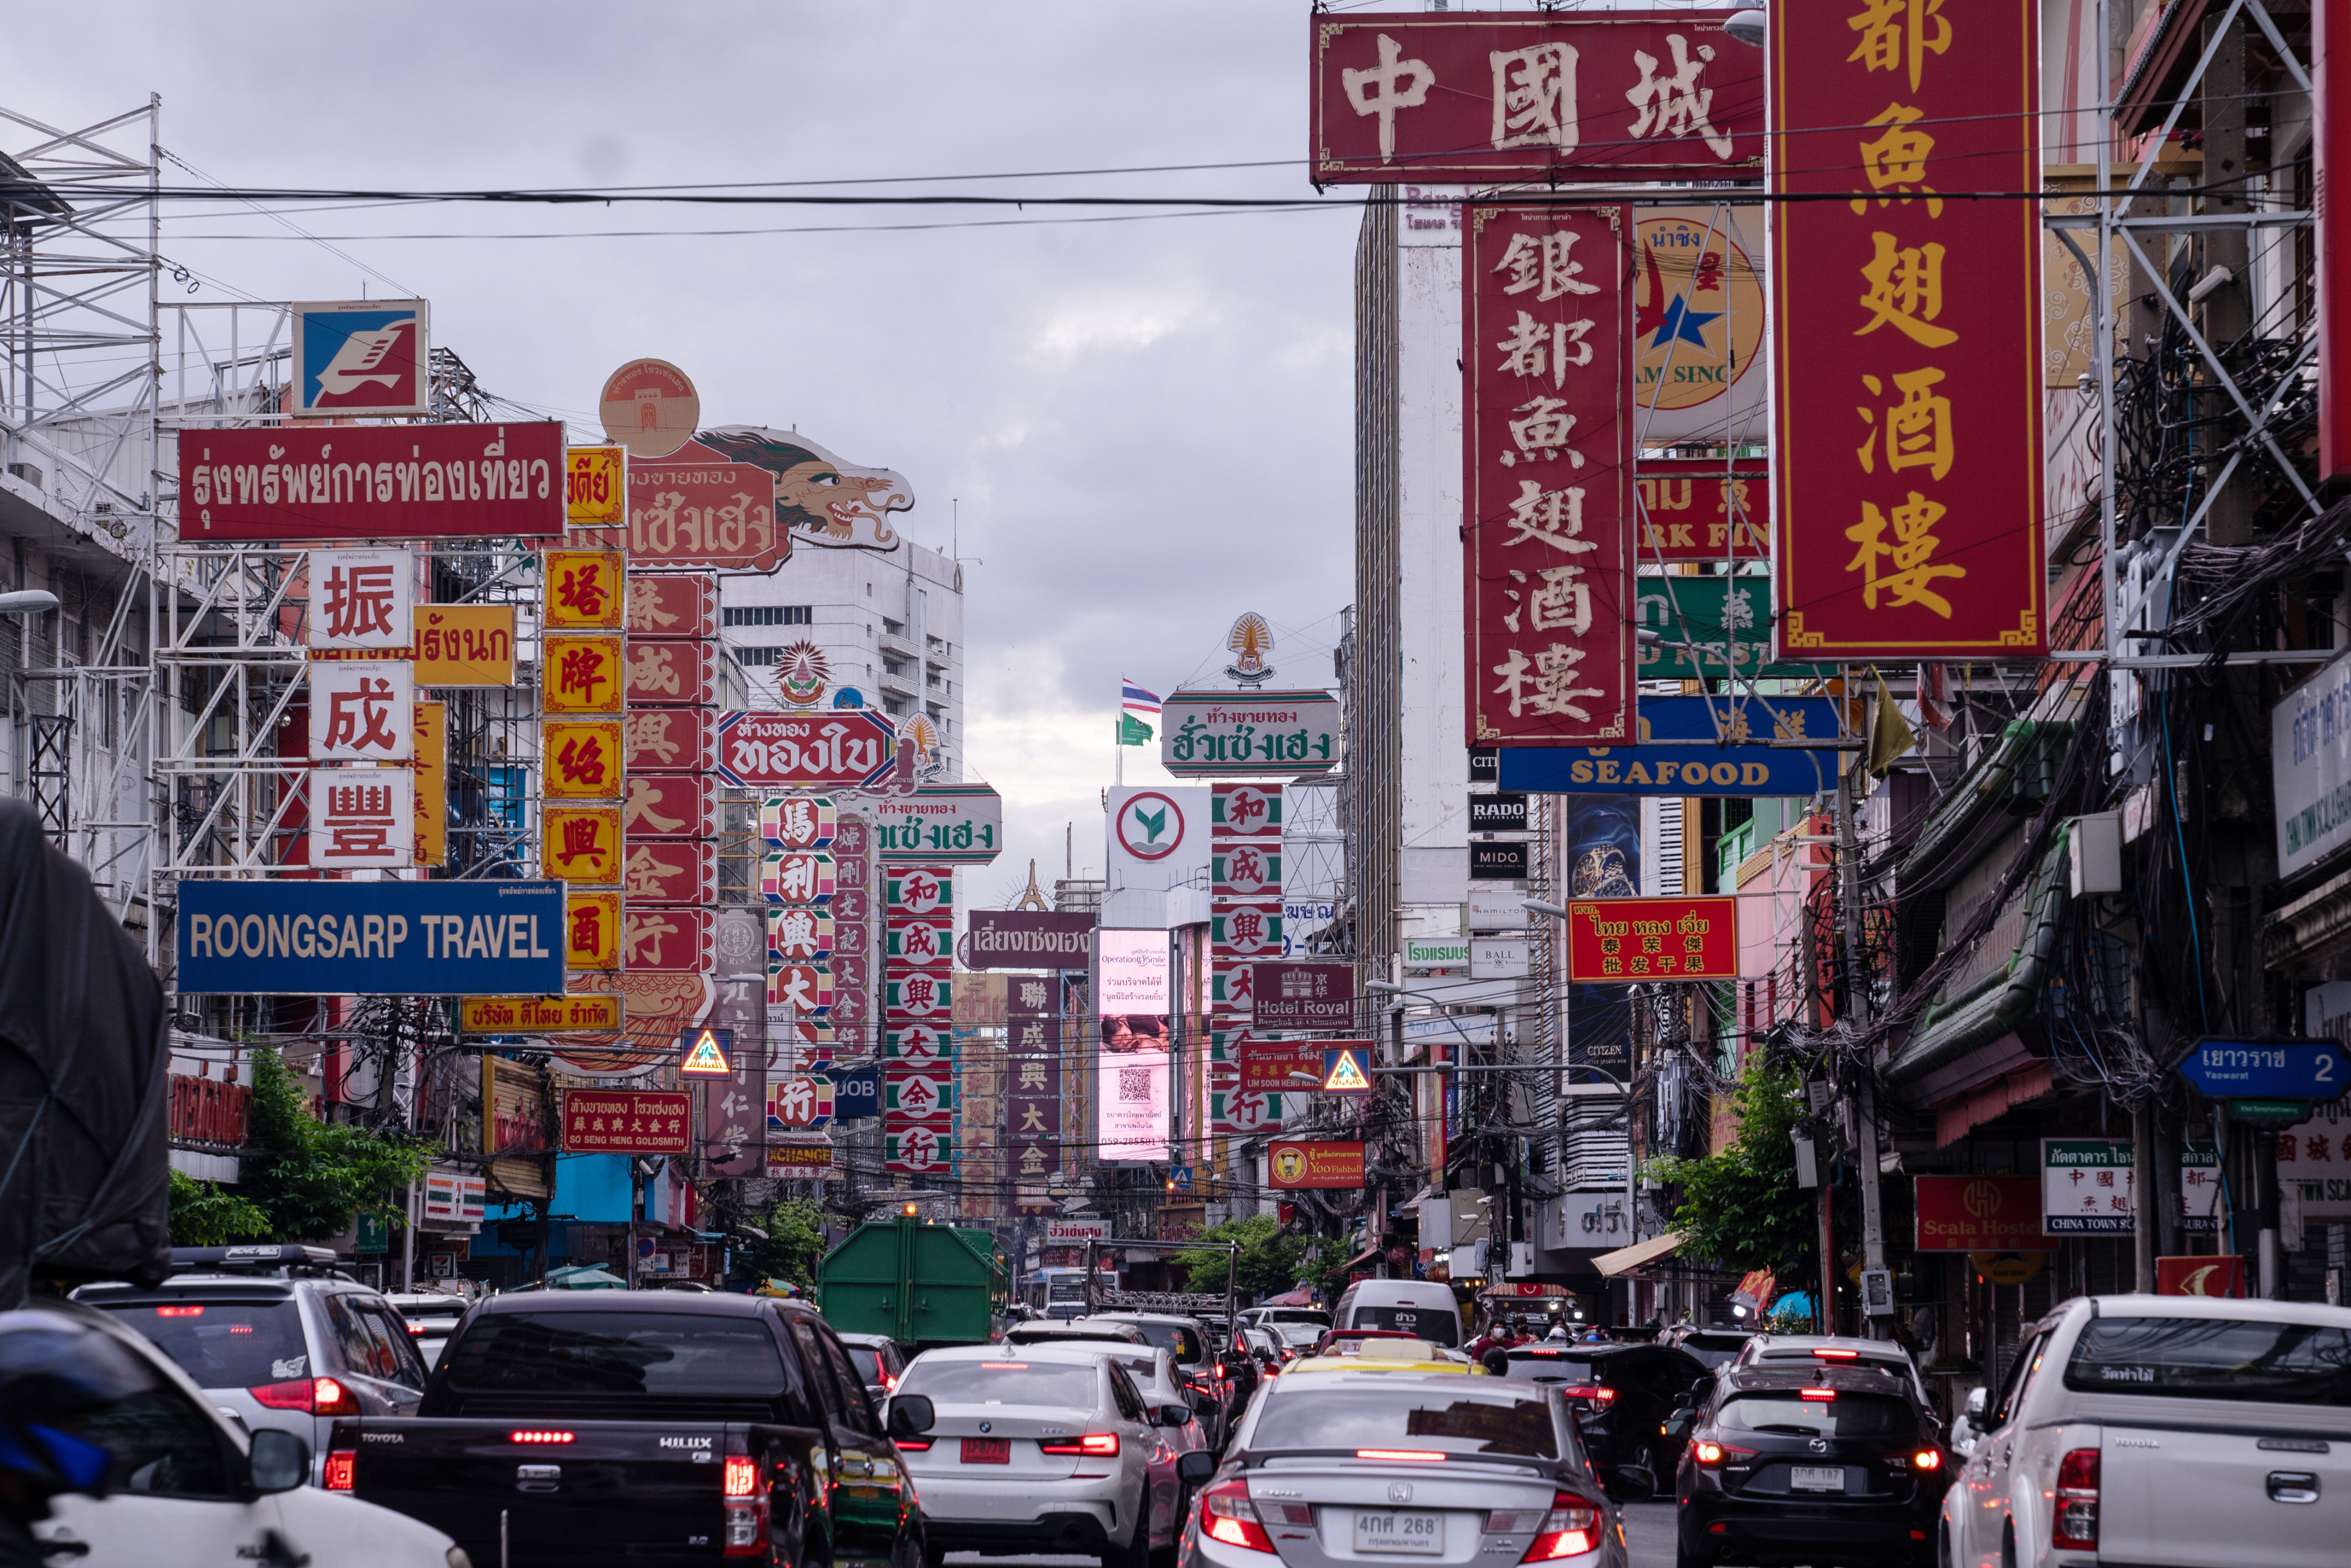 Signs in Thai and Chinese are seen along Yaowarat Road in the Chinatown area of Bangkok. Photo: Bloomberg